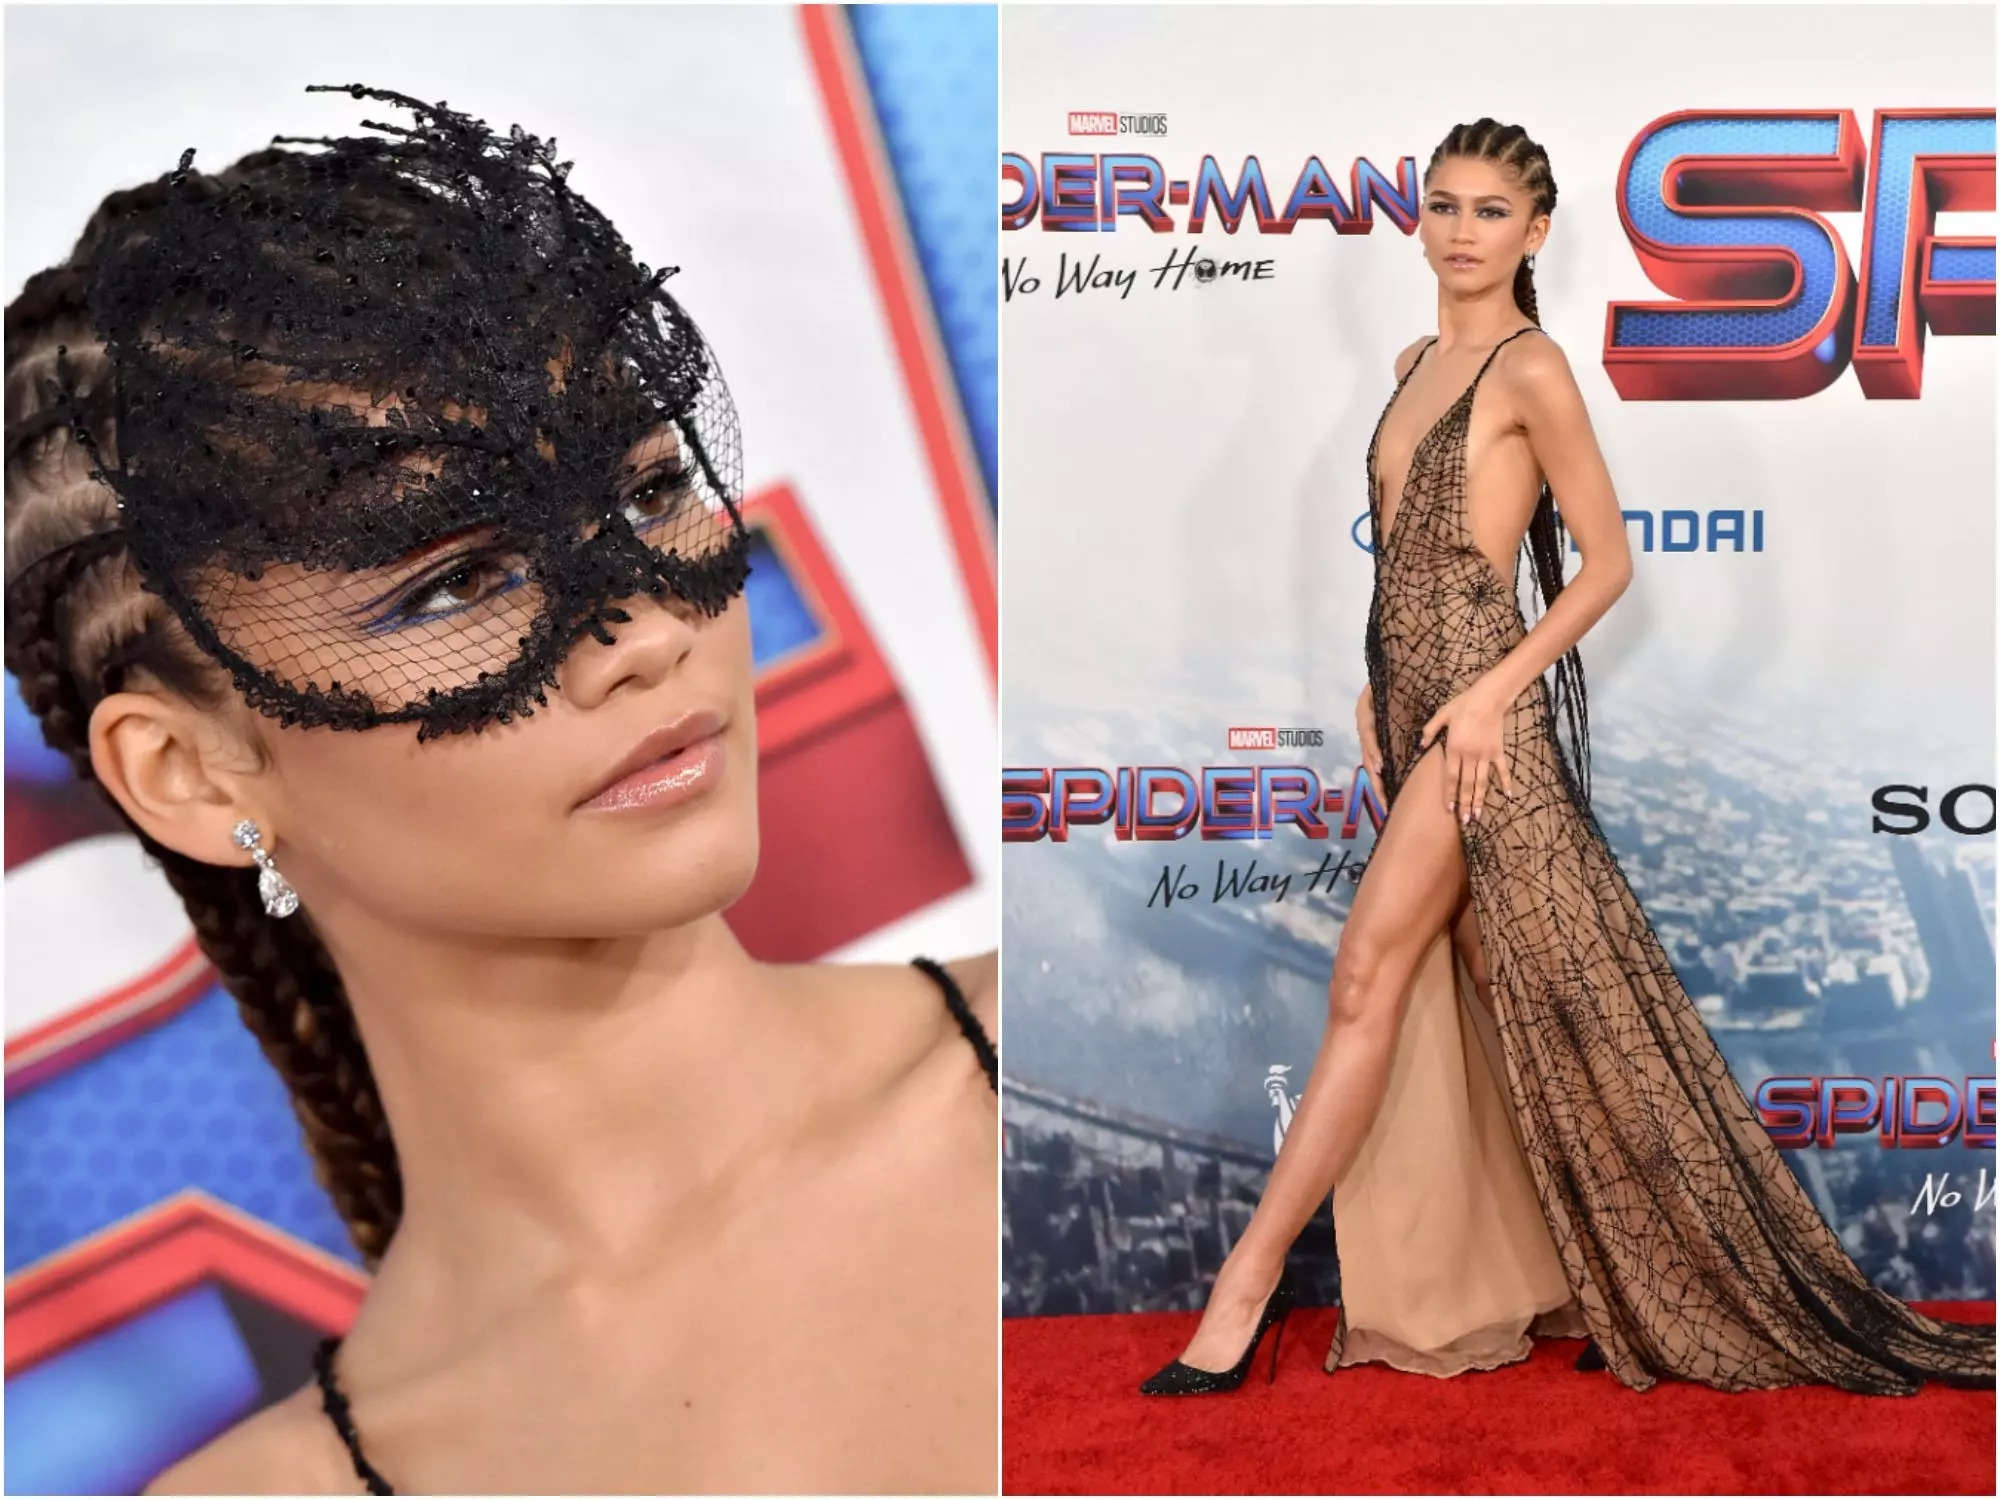 Zendaya wore a spiderweb dress with thigh-high slit and matching mask at  the 'Spider-Man: No Way Home' premiere